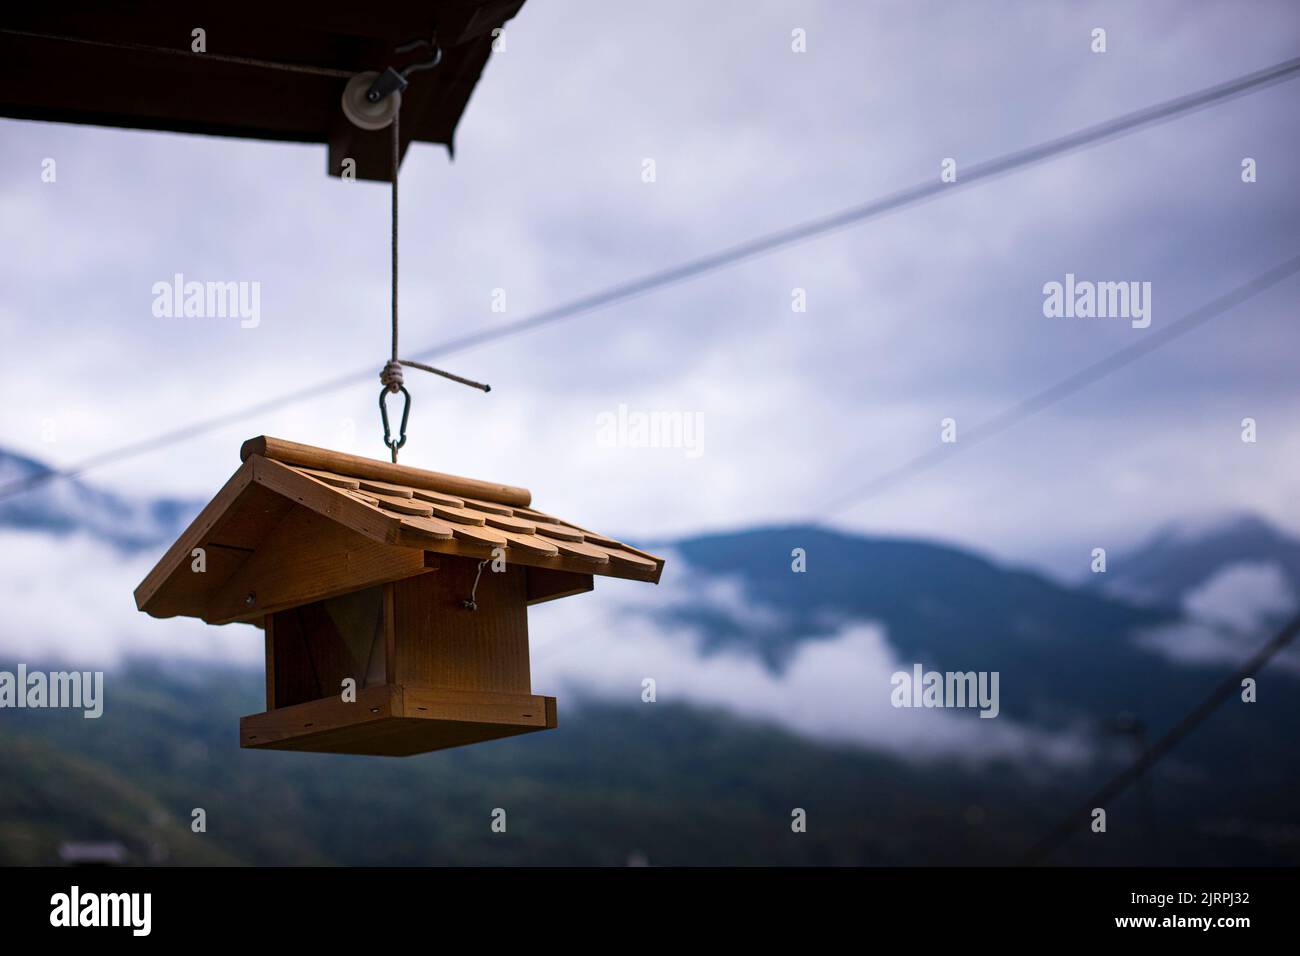 Wood brown birdhouse hanging from a roof with mountains and winter sky in the background. Wallpaper with copy space. Garden ecology idea. Stock Photo